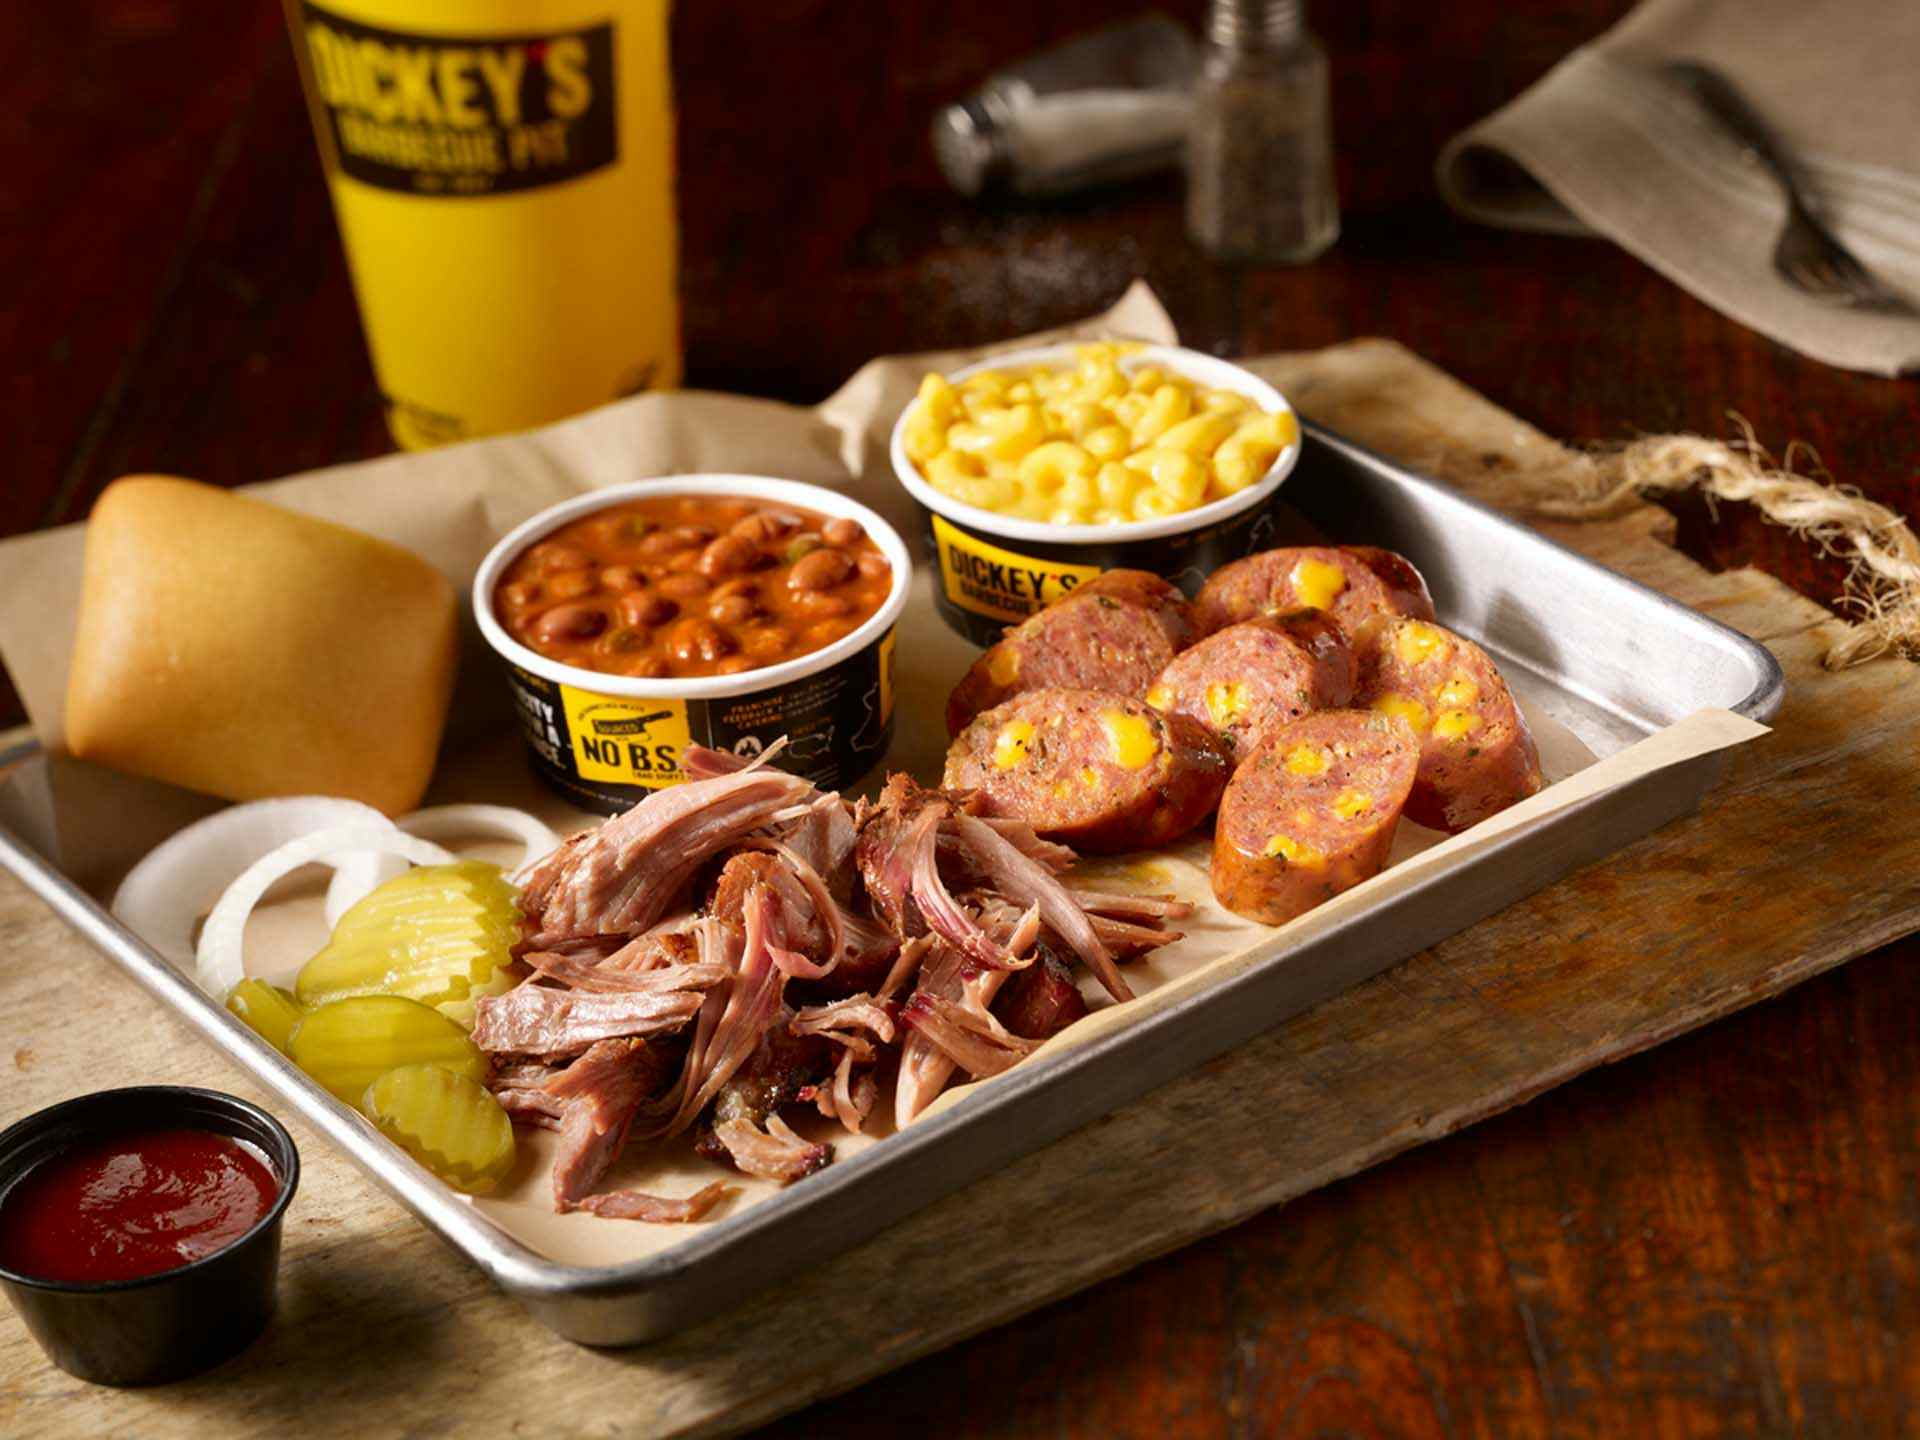 Global Franchise: Dickey's BBQ pit